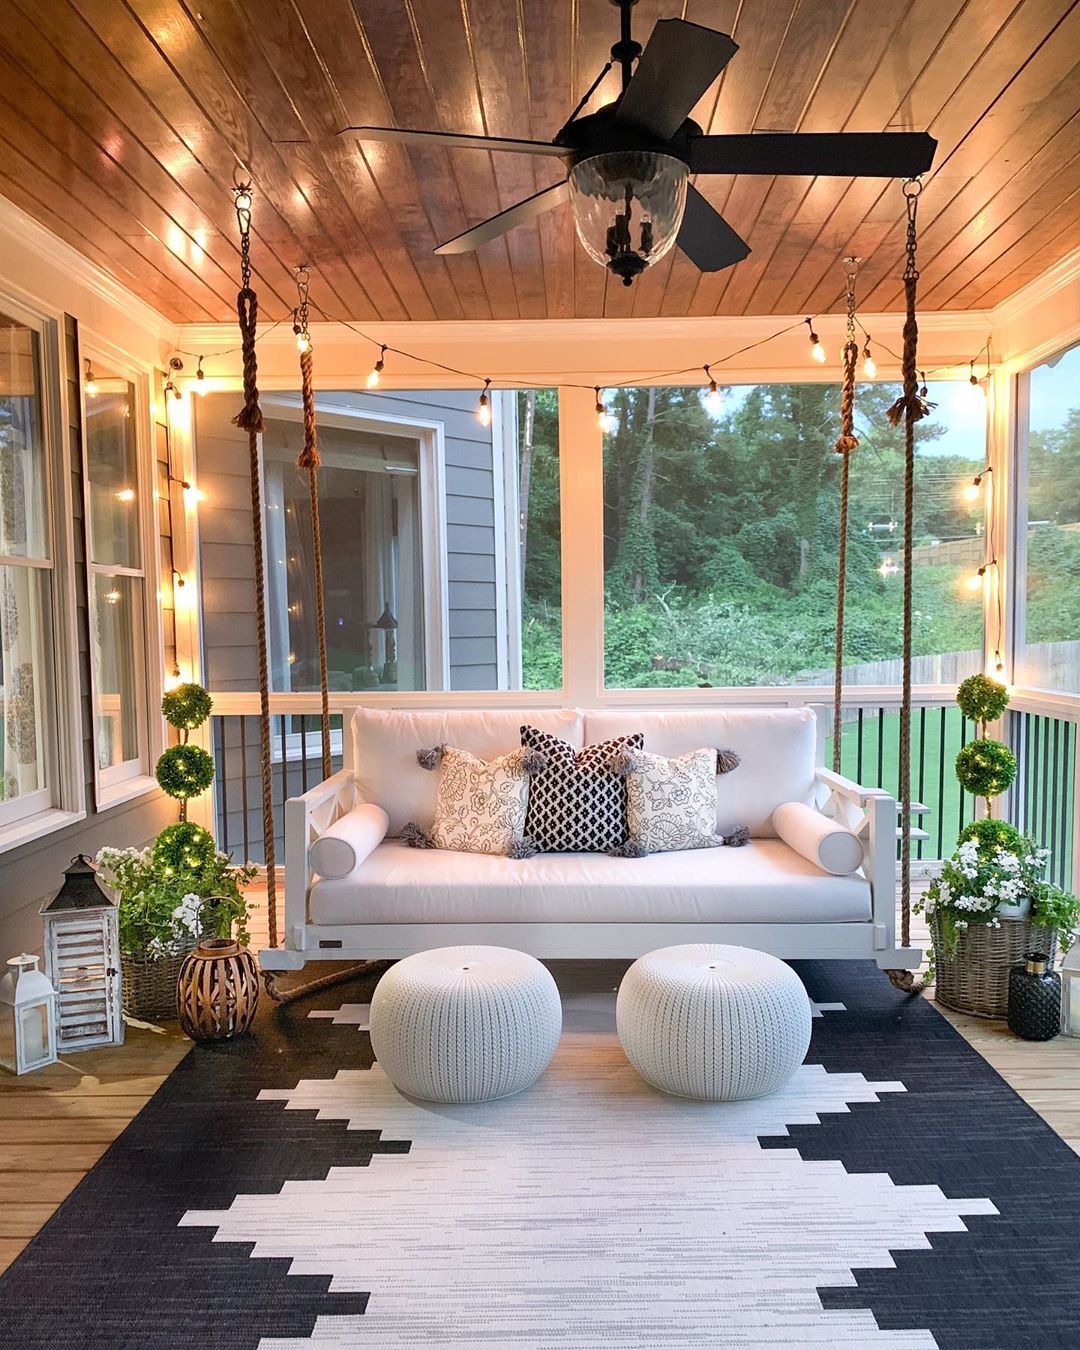 Rethink Your Outdoor Space by Channeling This Dreamy Porch Swing | Hunker